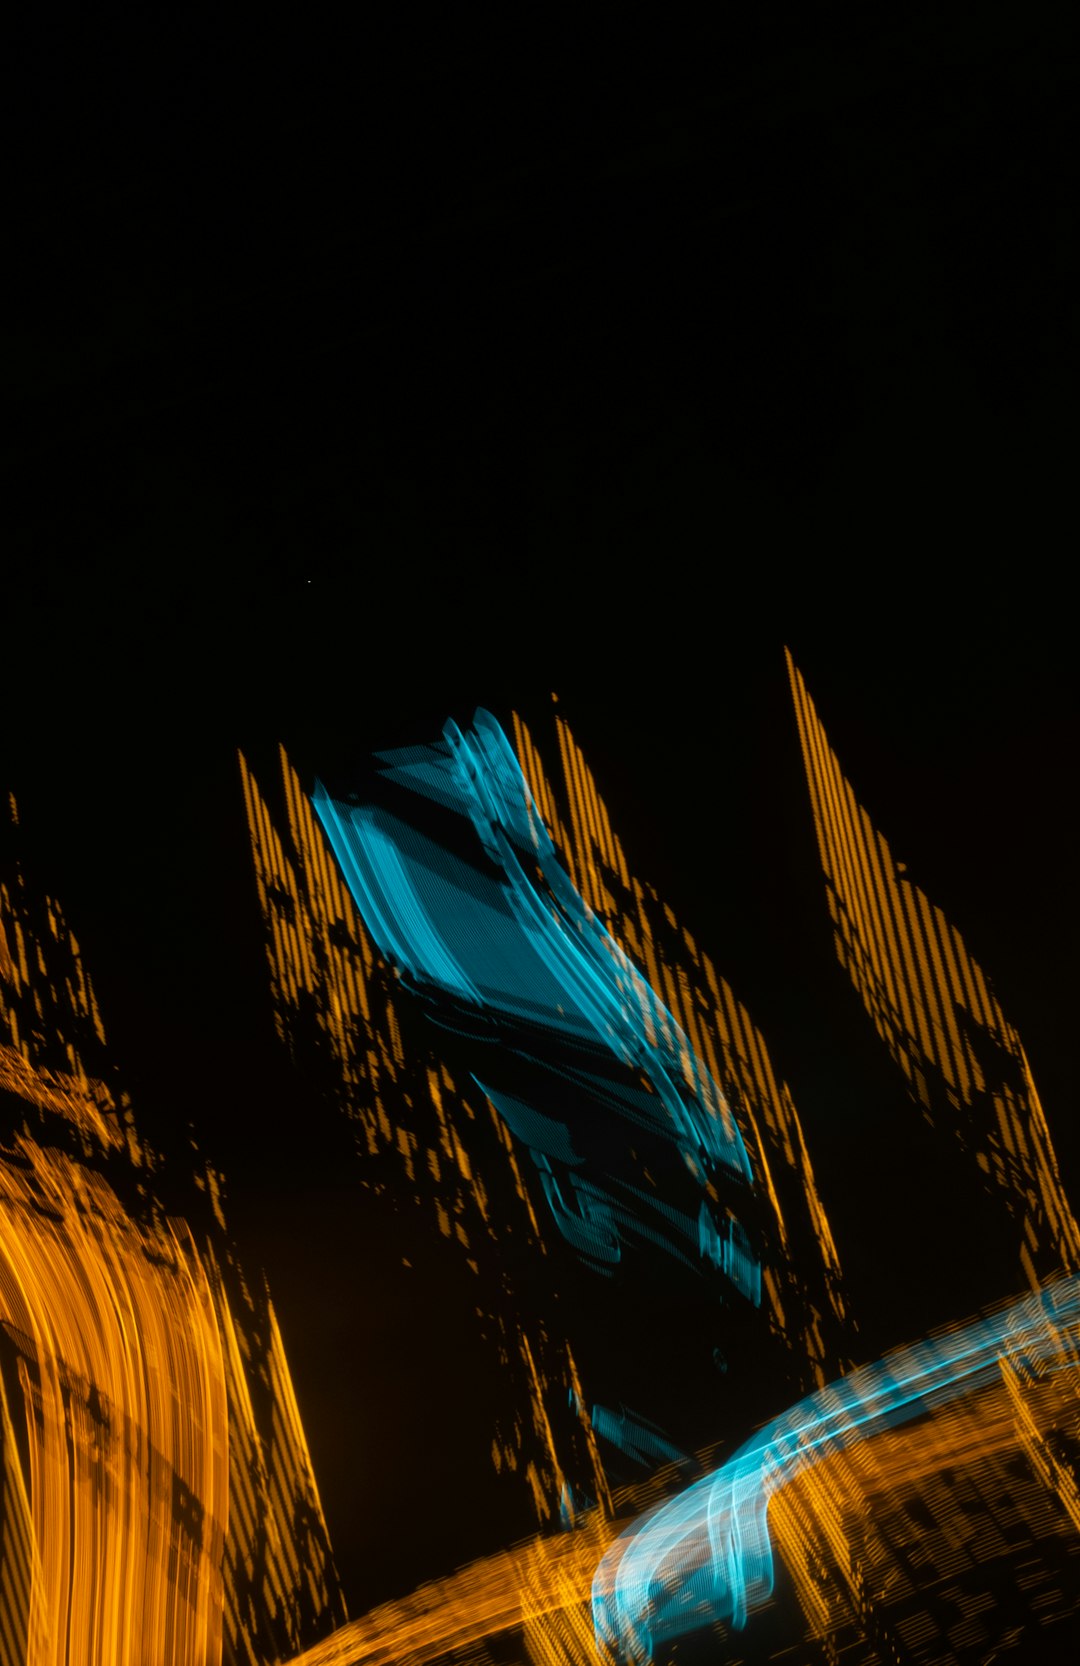 abstract light trails in the shape of buildings on a black background, with orange and blue colors, presented simply and minimally with motion blur in a low angle shot. –ar 83:128